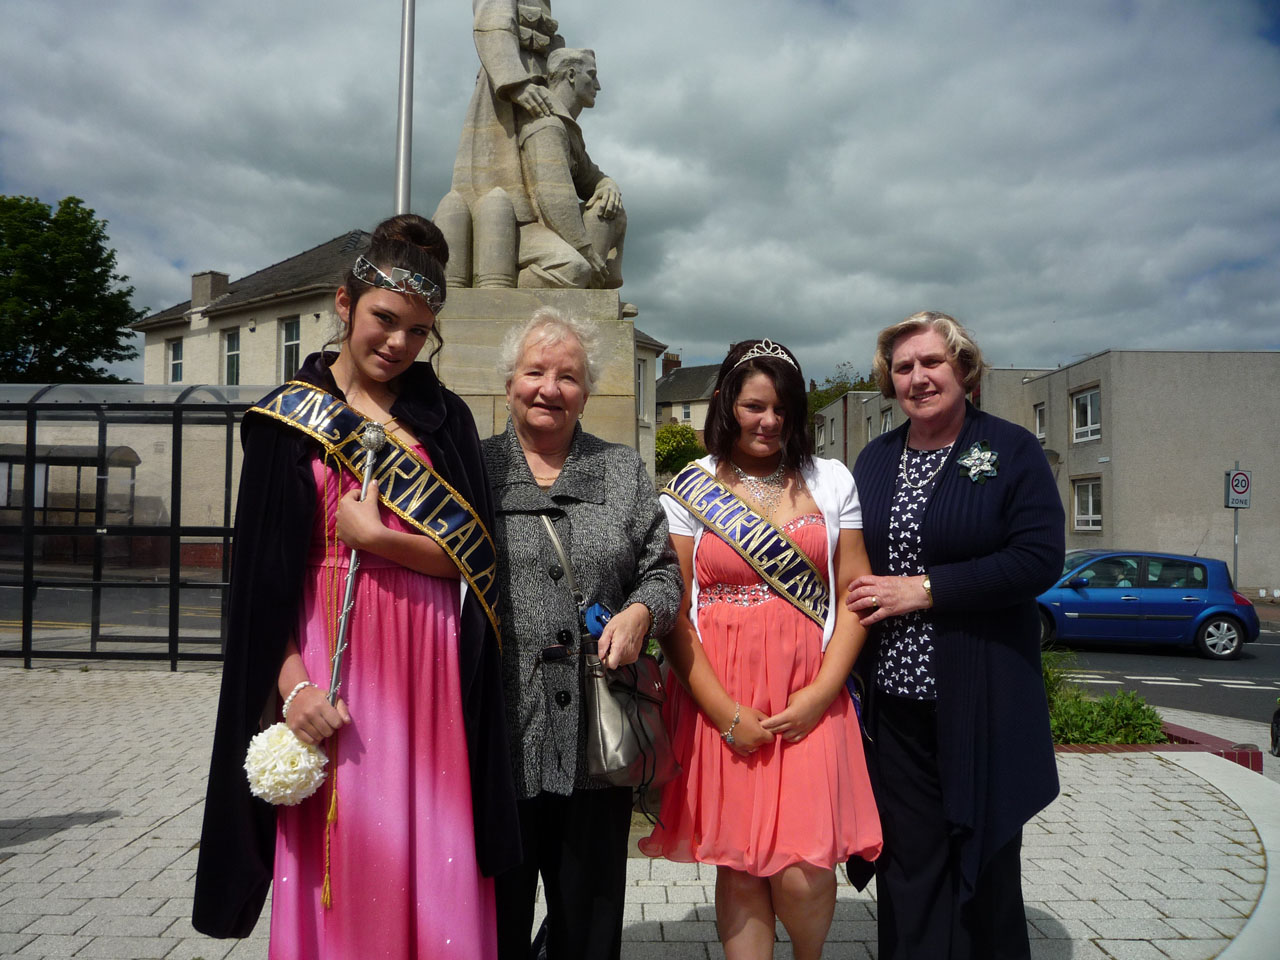 Attending the crowning of the Gala Queen of Kinghorn on a trip back to my hometown in Scotland. Photo courtesy: Margaret Fick, pensioner second from left